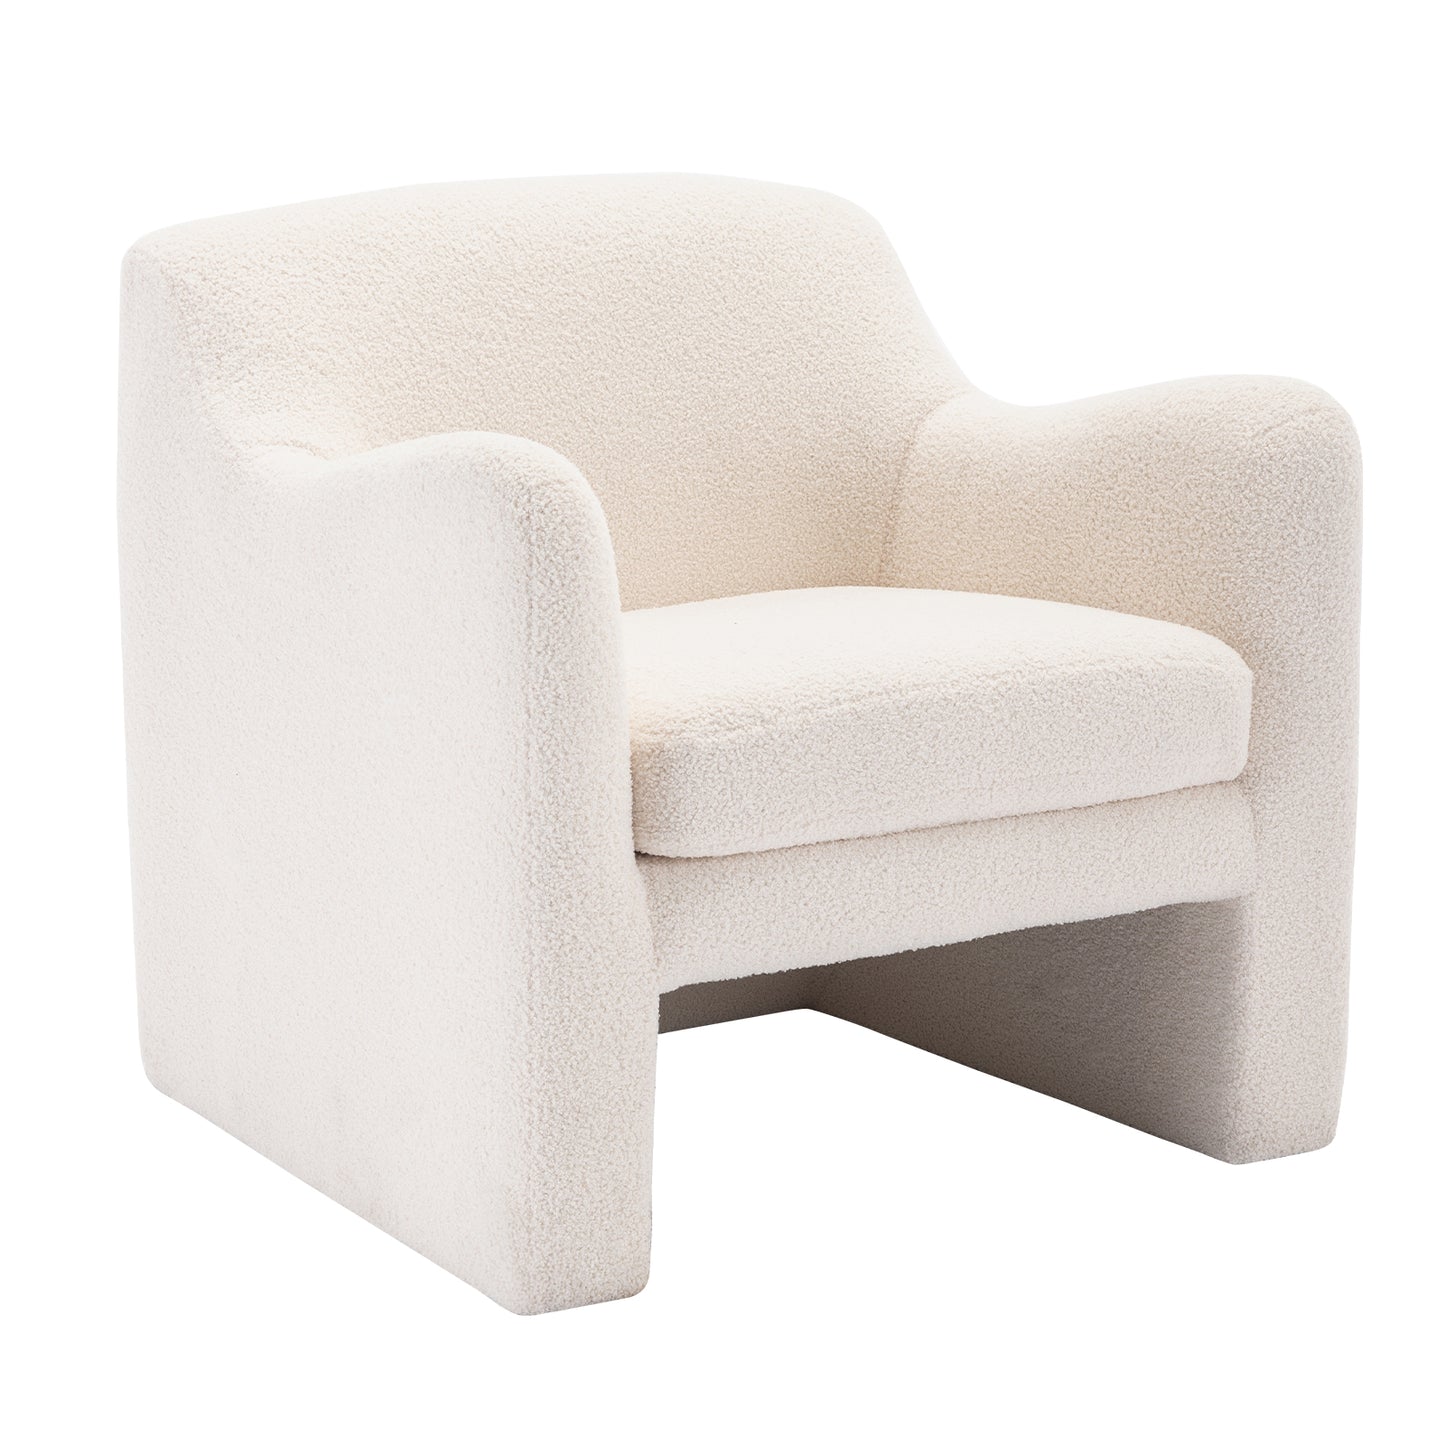 COLAMY Comfy Woolen Fabric Accent Chair Soft Padded Armchair